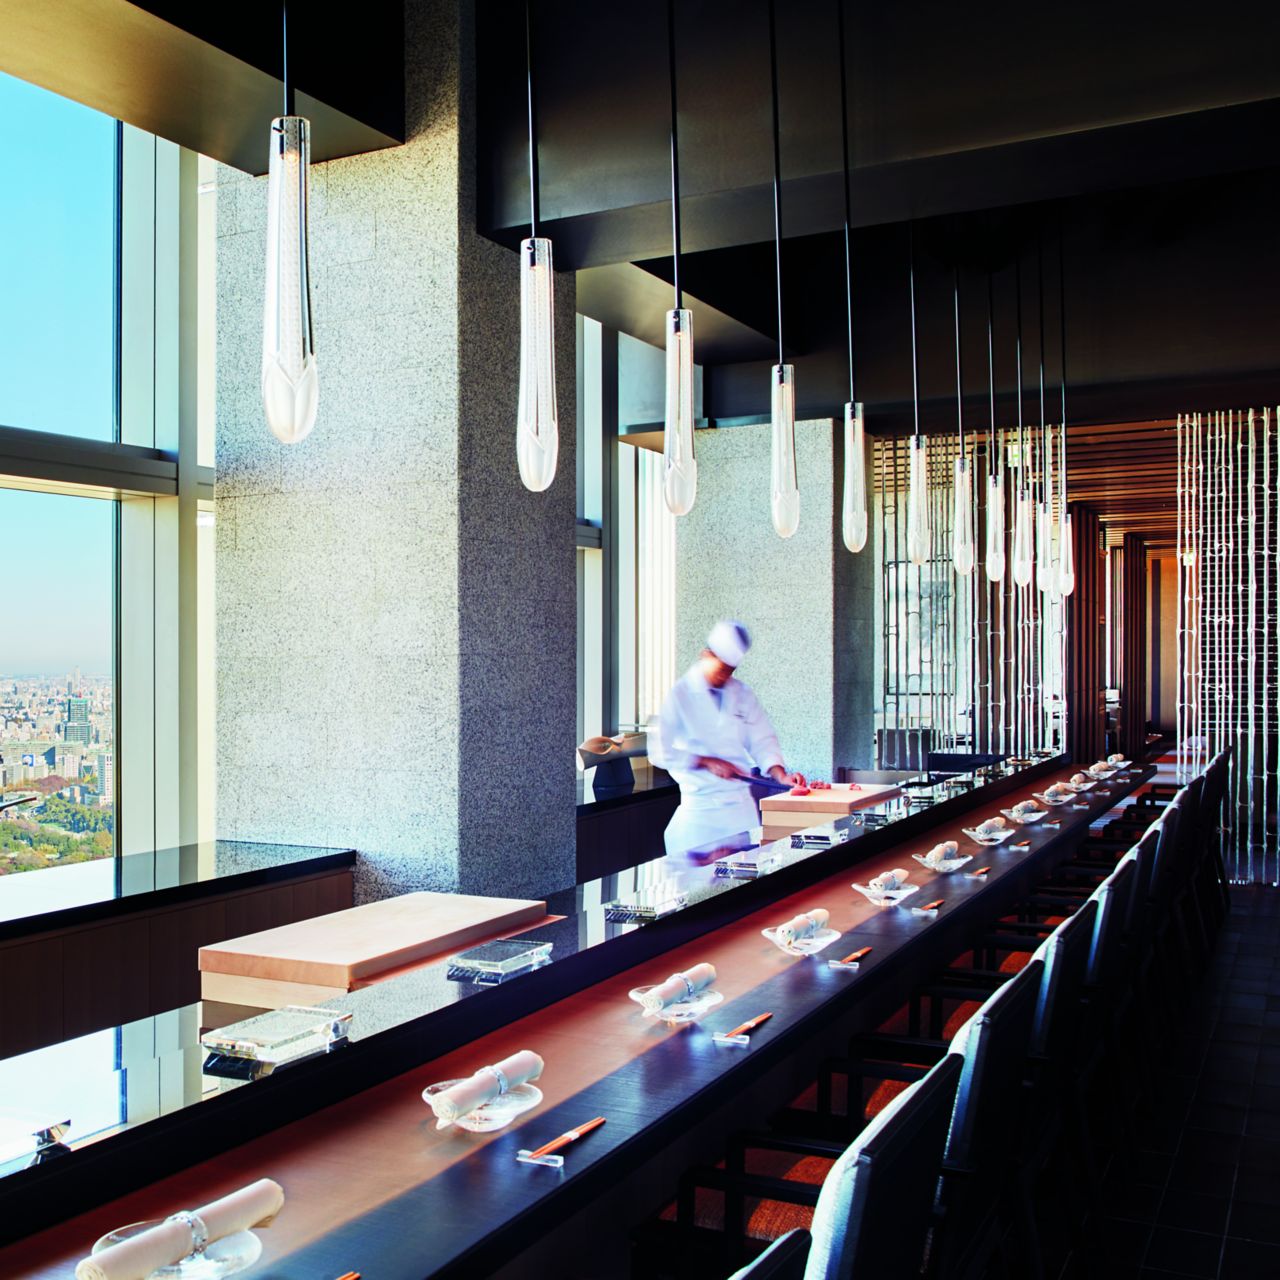 Tables lined up along floor-to-ceiling windows overlooking Tokyo in Hinokizaka with a chef working at the far end